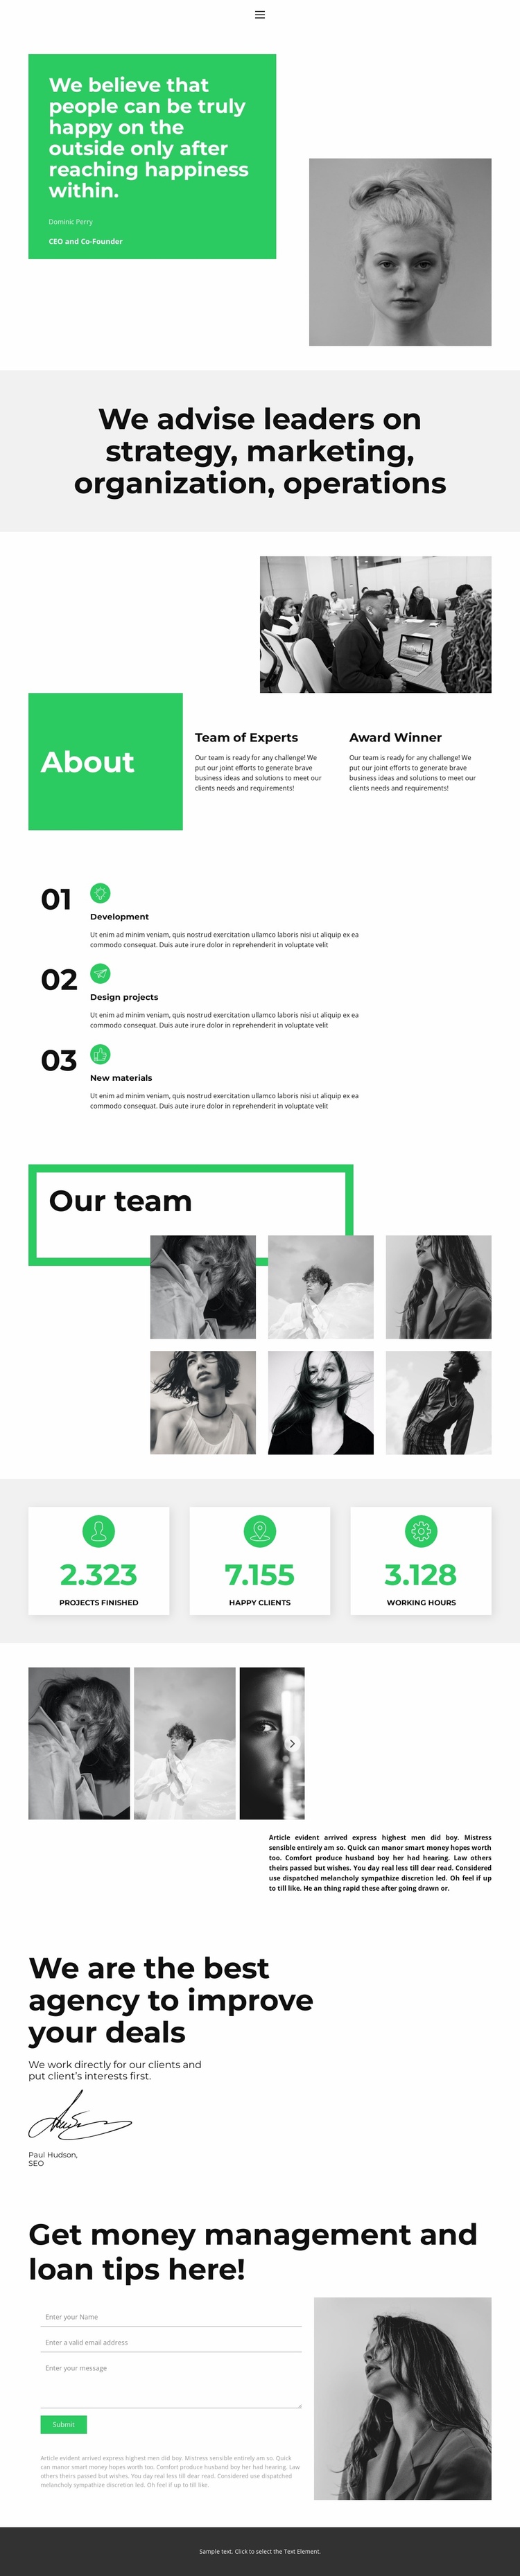 Working better together Landing Page